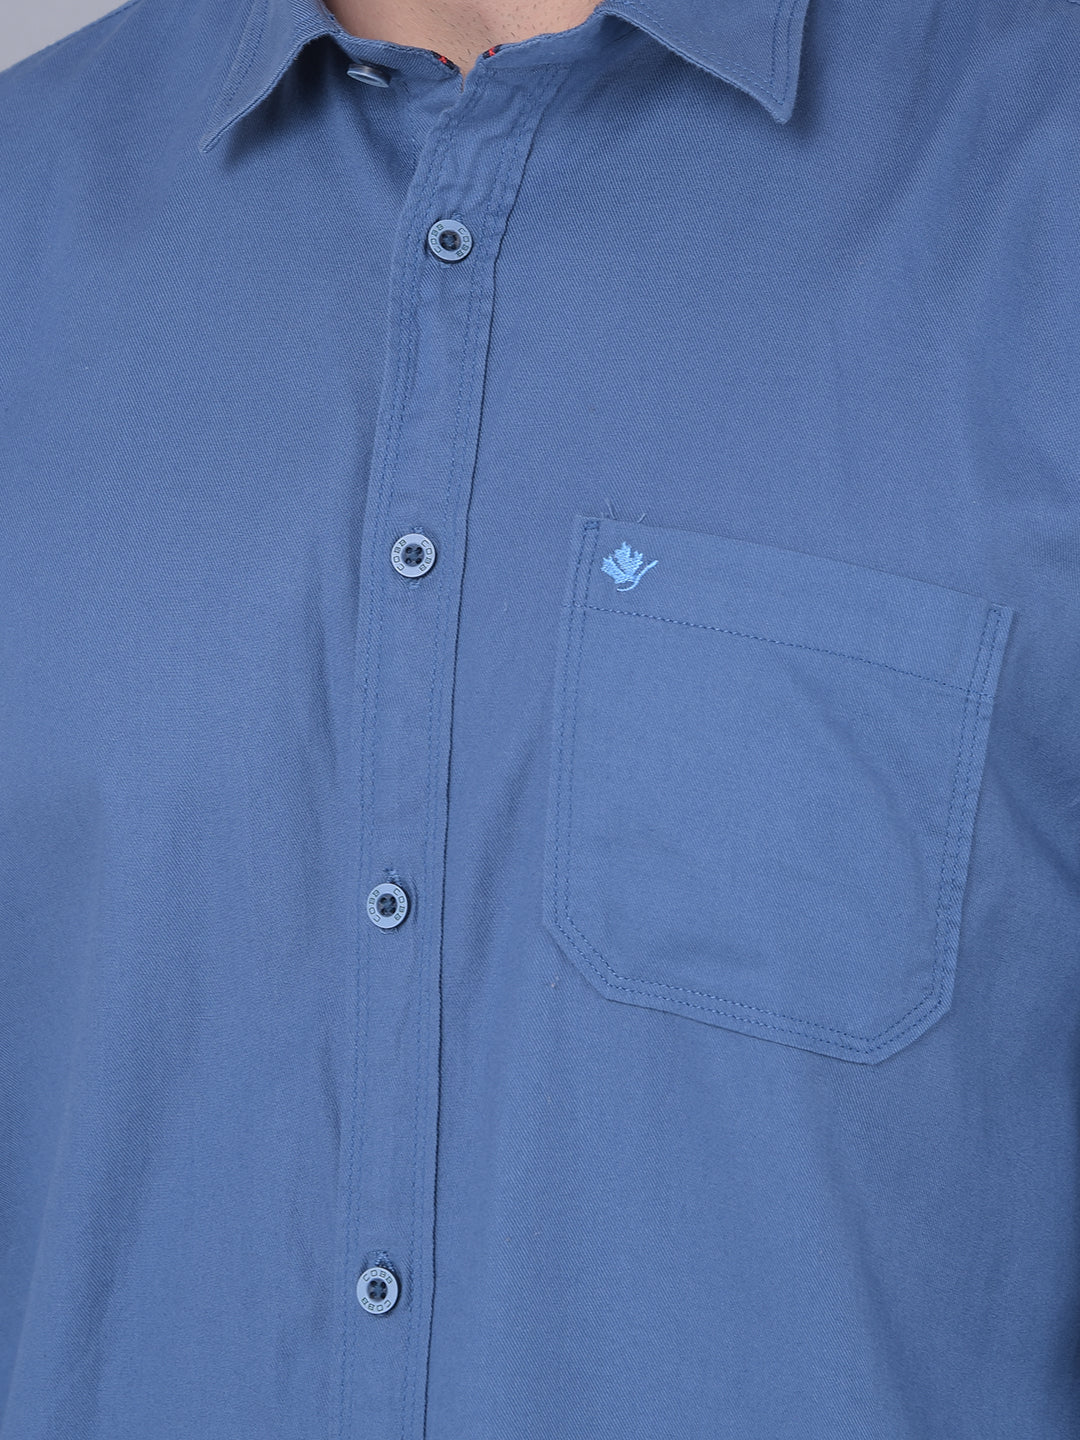 COBB SOLID YALE BLUE SLIM FIT CASUAL SHIRT